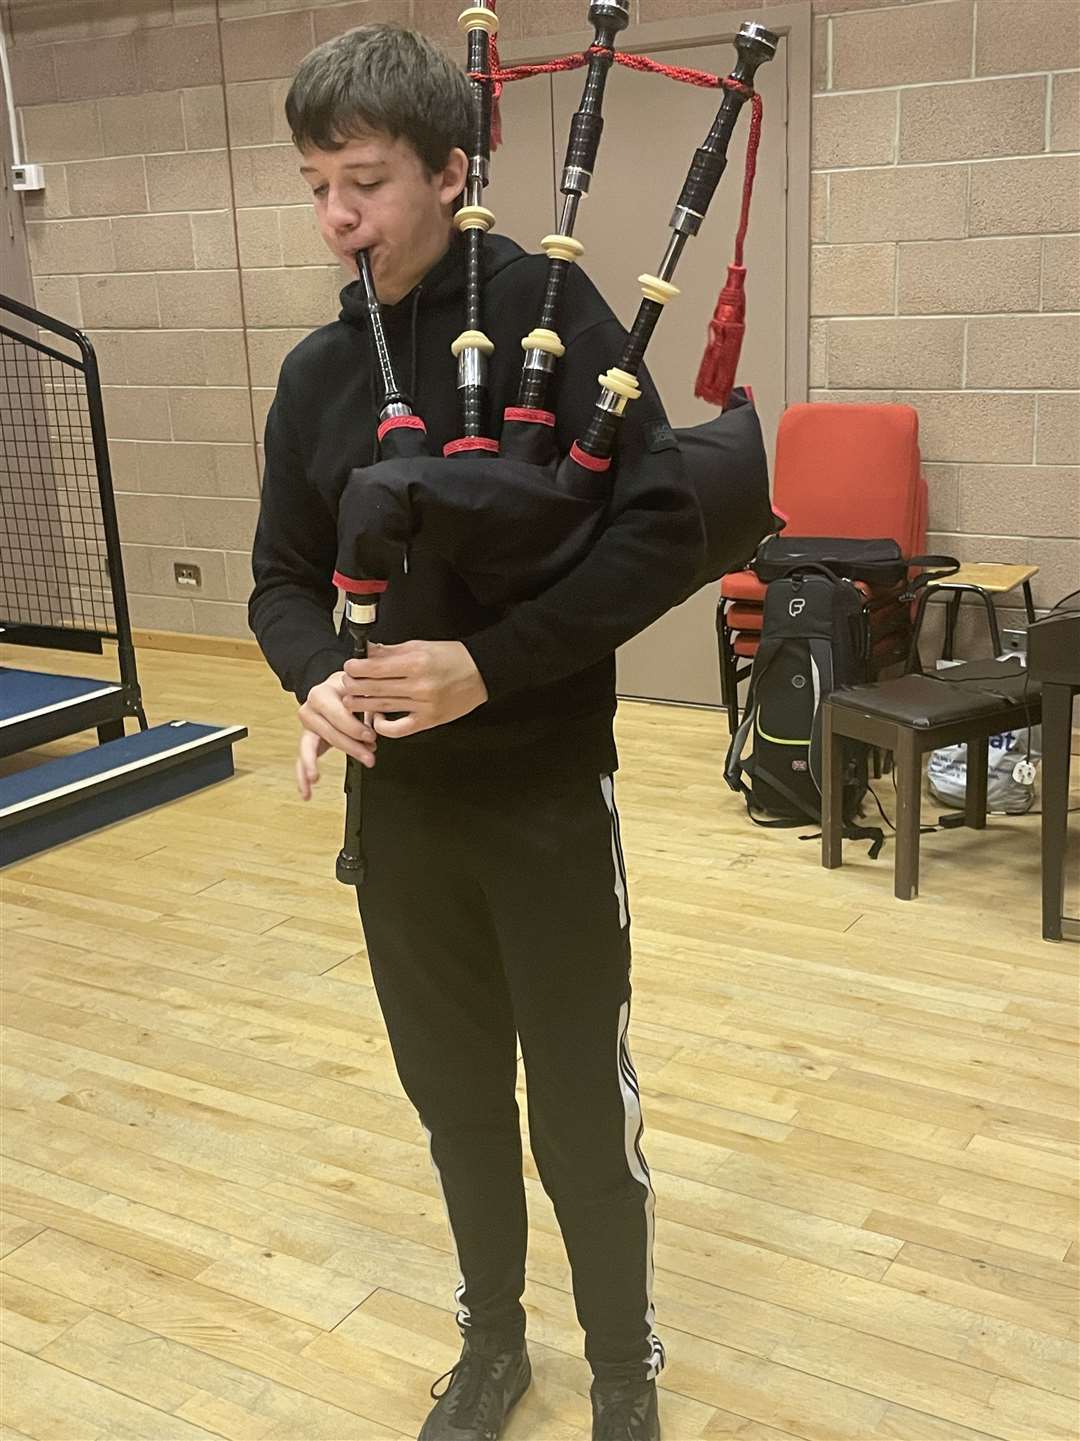 A pupil trys out new set of bagpipes.